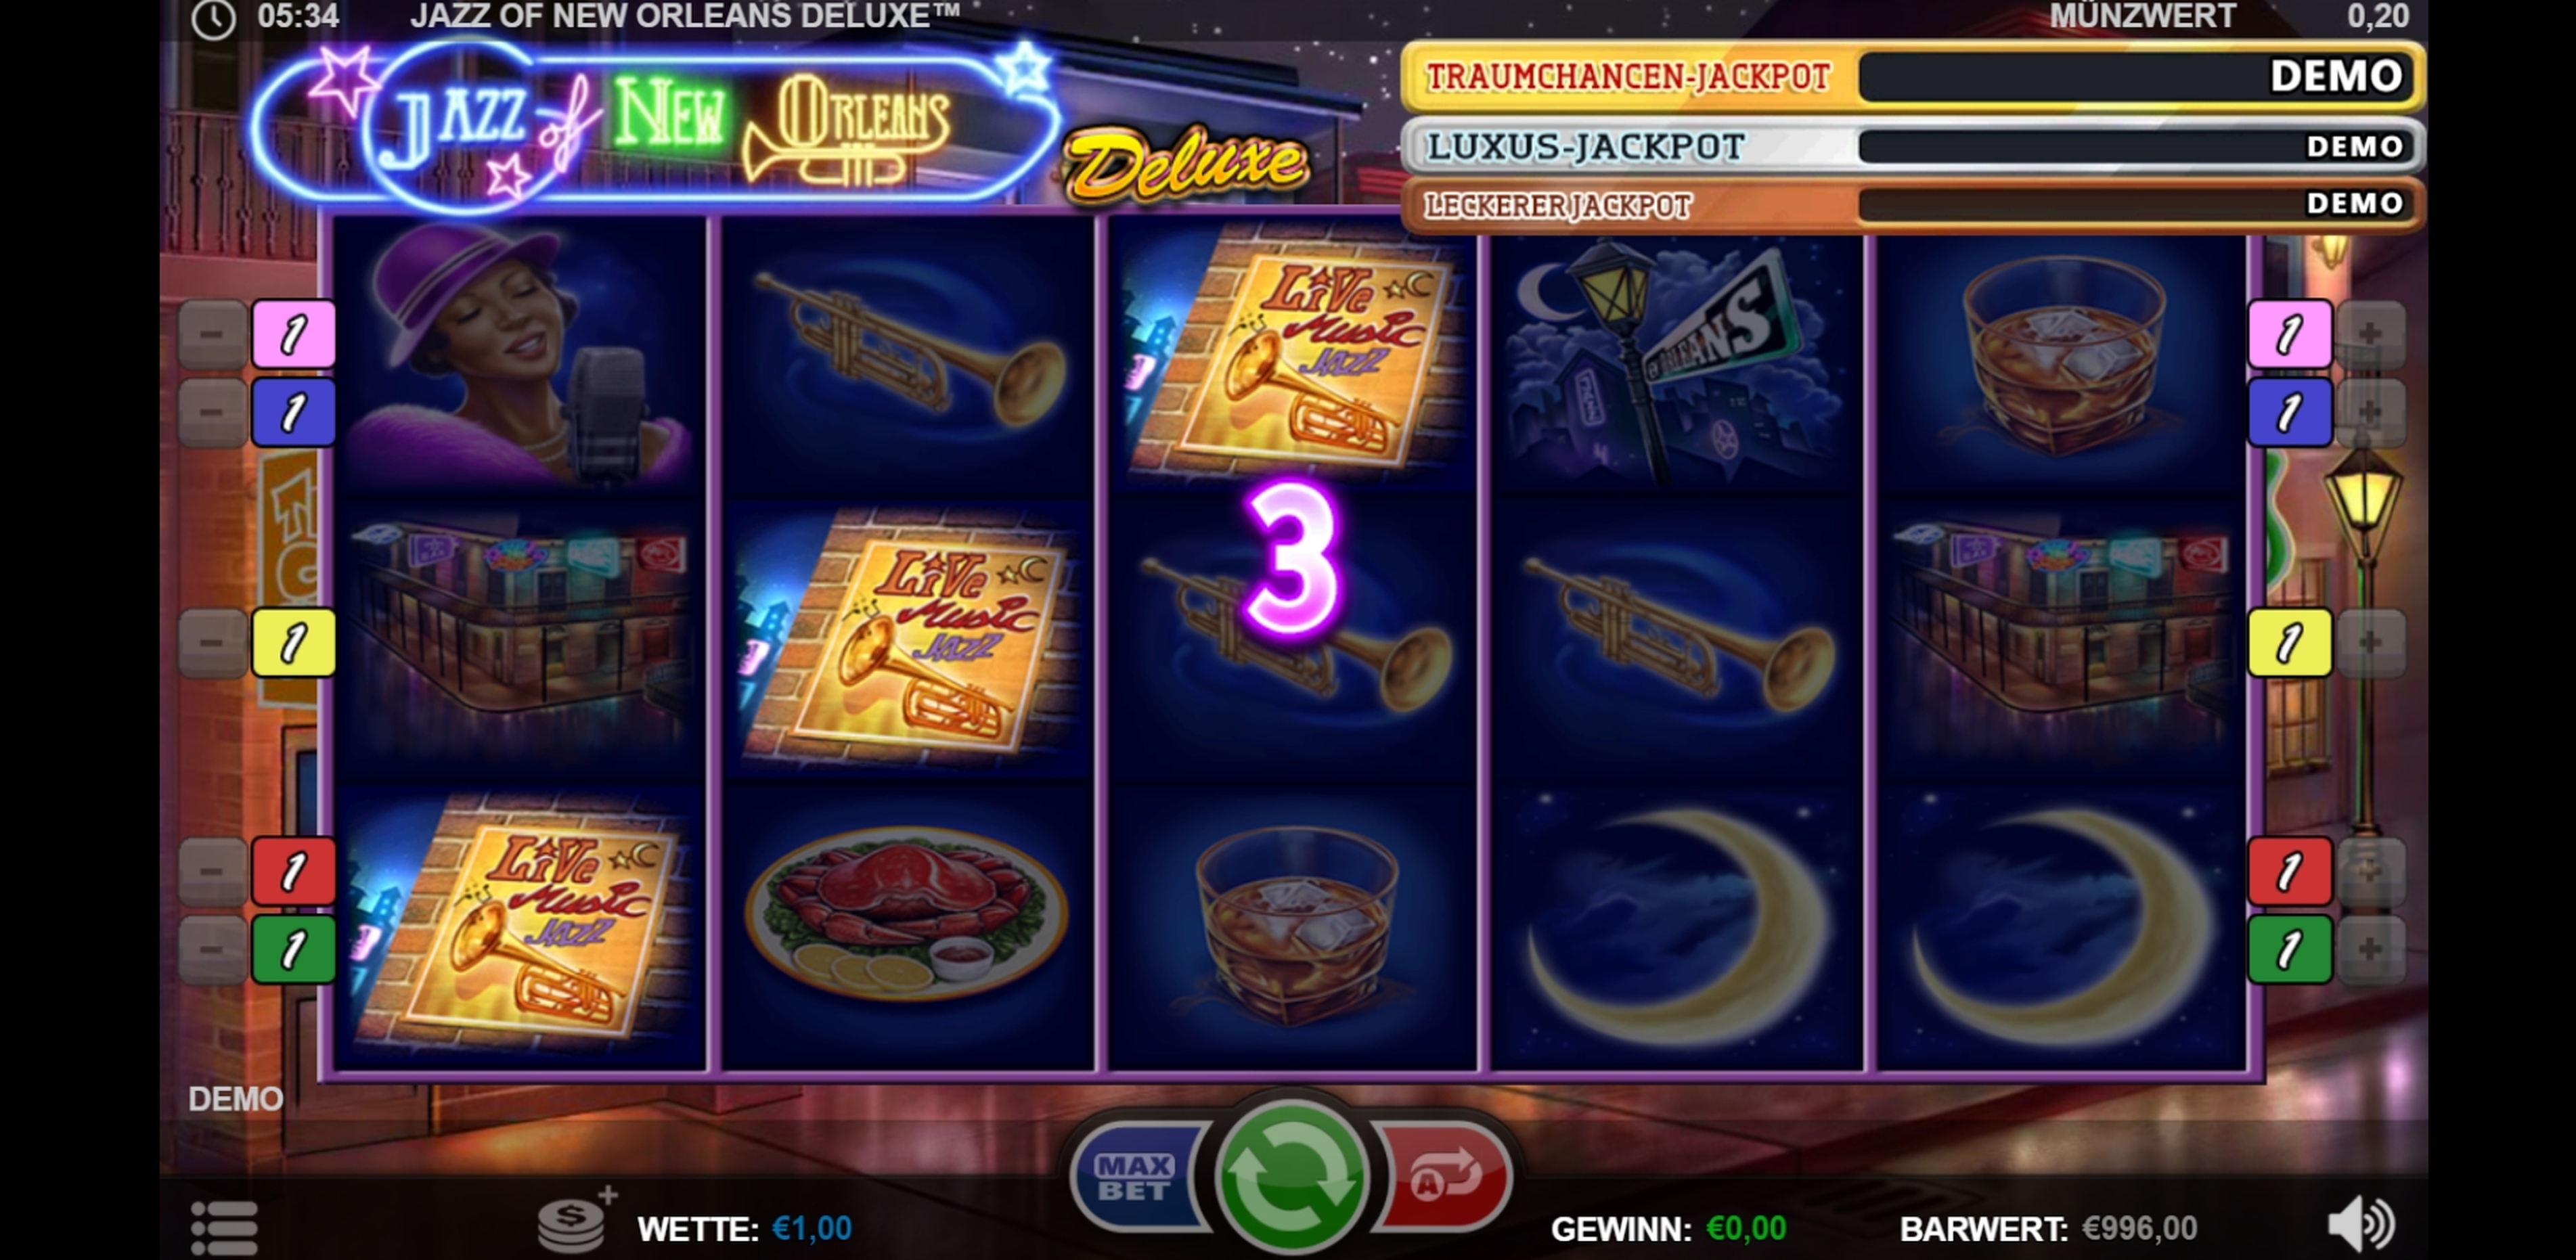 Win Money in Jazz of New Orleans Free Slot Game by Playn GO